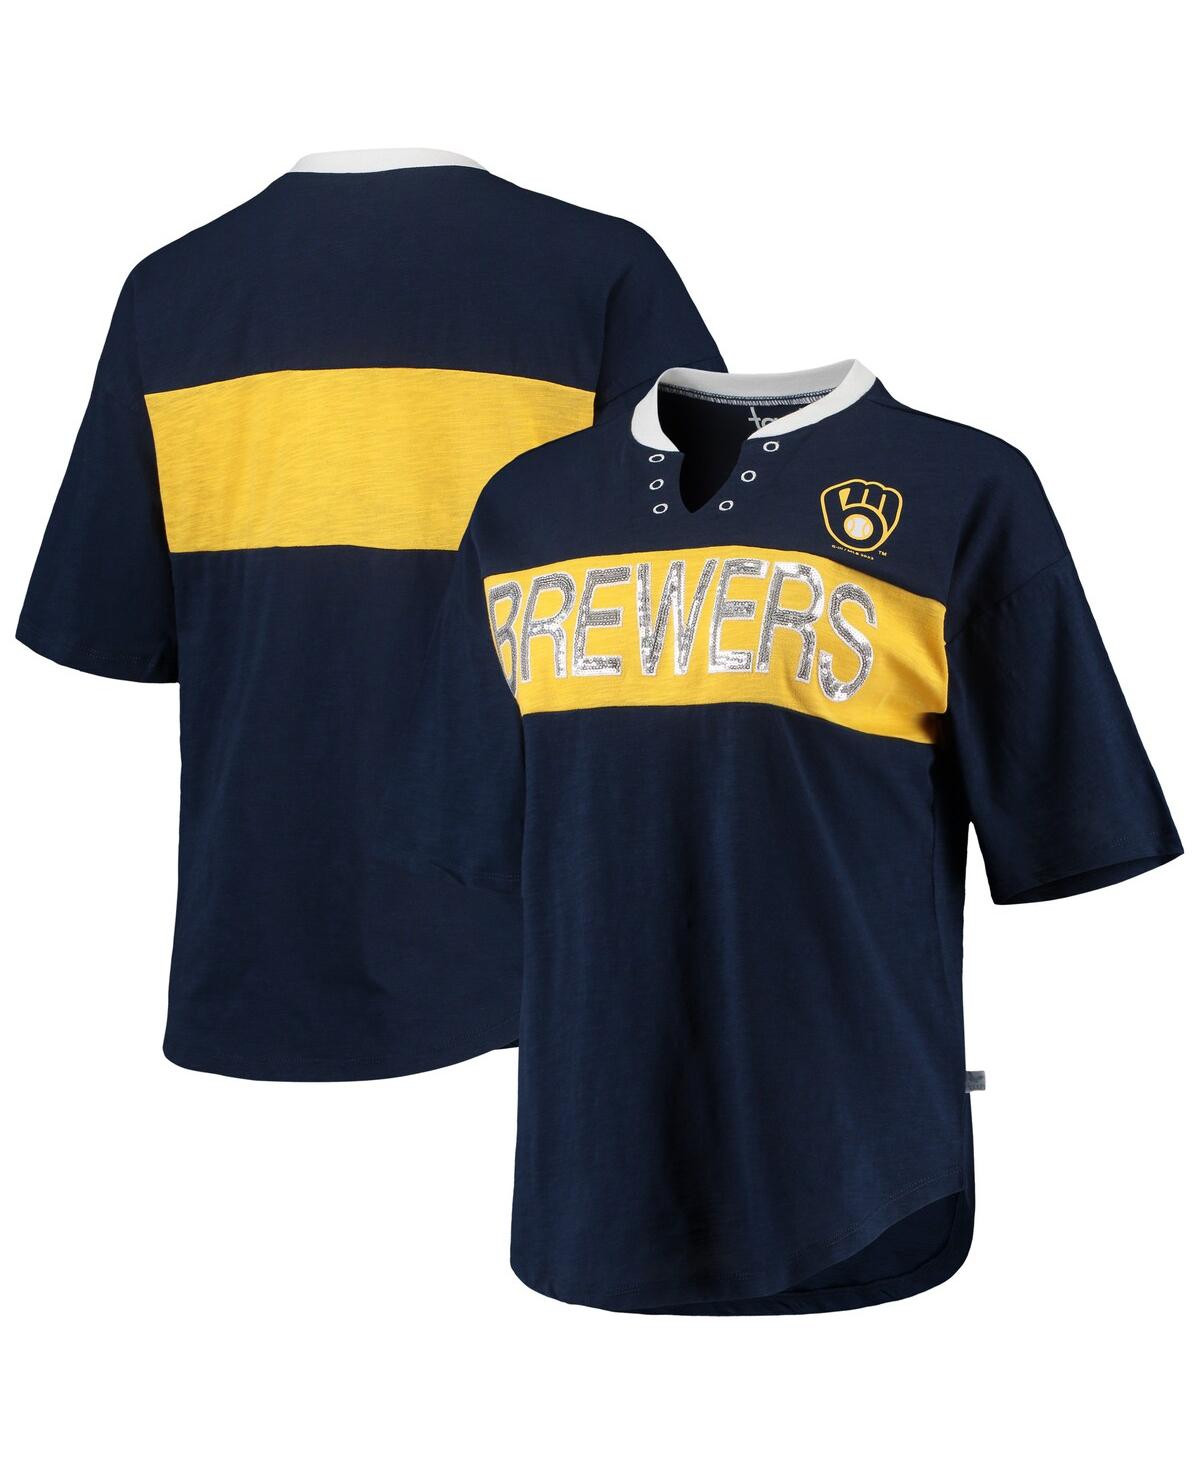 Women's Touch Navy and Gold Milwaukee Brewers Lead Off Notch Neck T-shirt - Navy, Gold